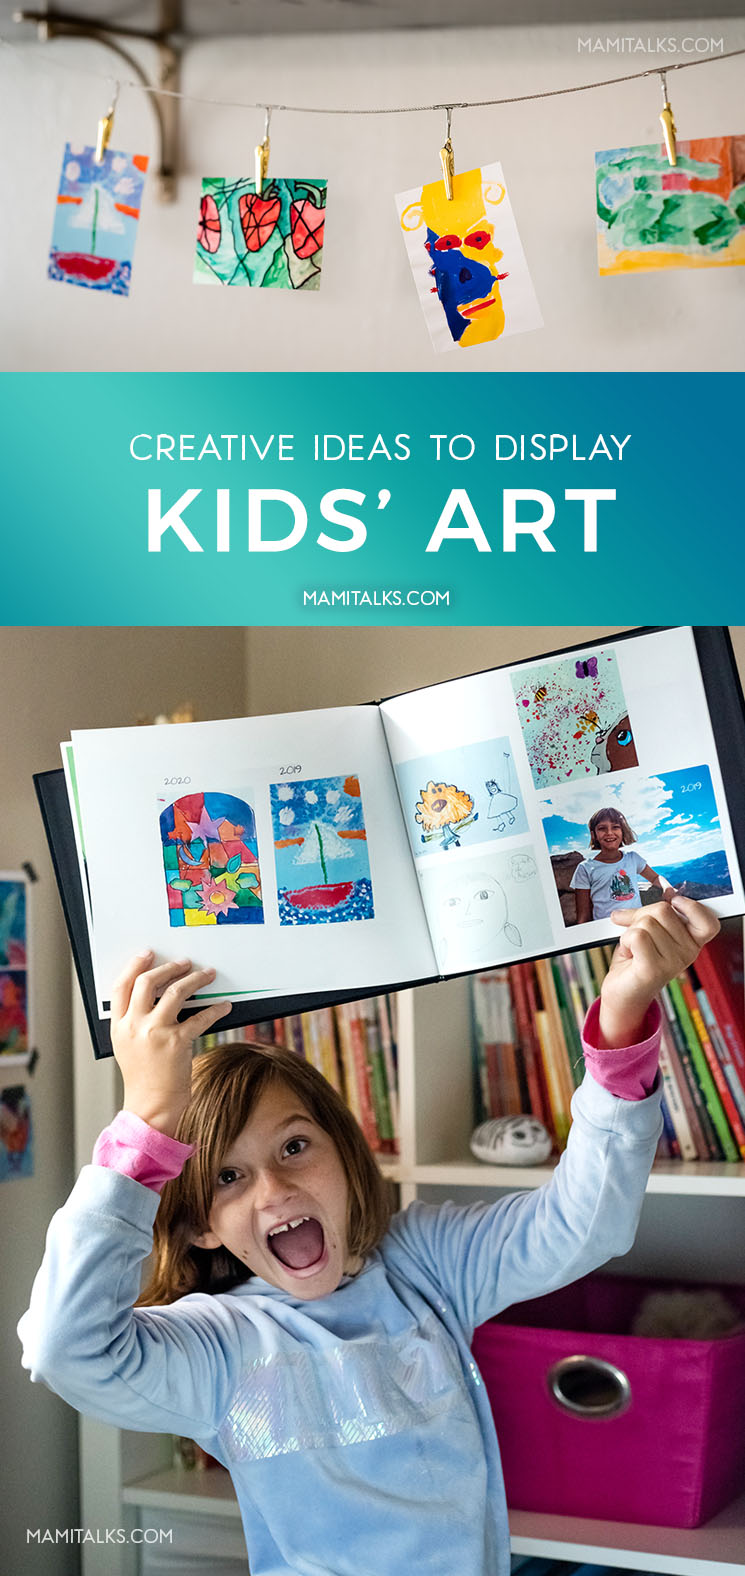 Creative Ideas to display kids' art, make photo books, print them little and hang them with pins, print them and frame them. -MamiTalks.com